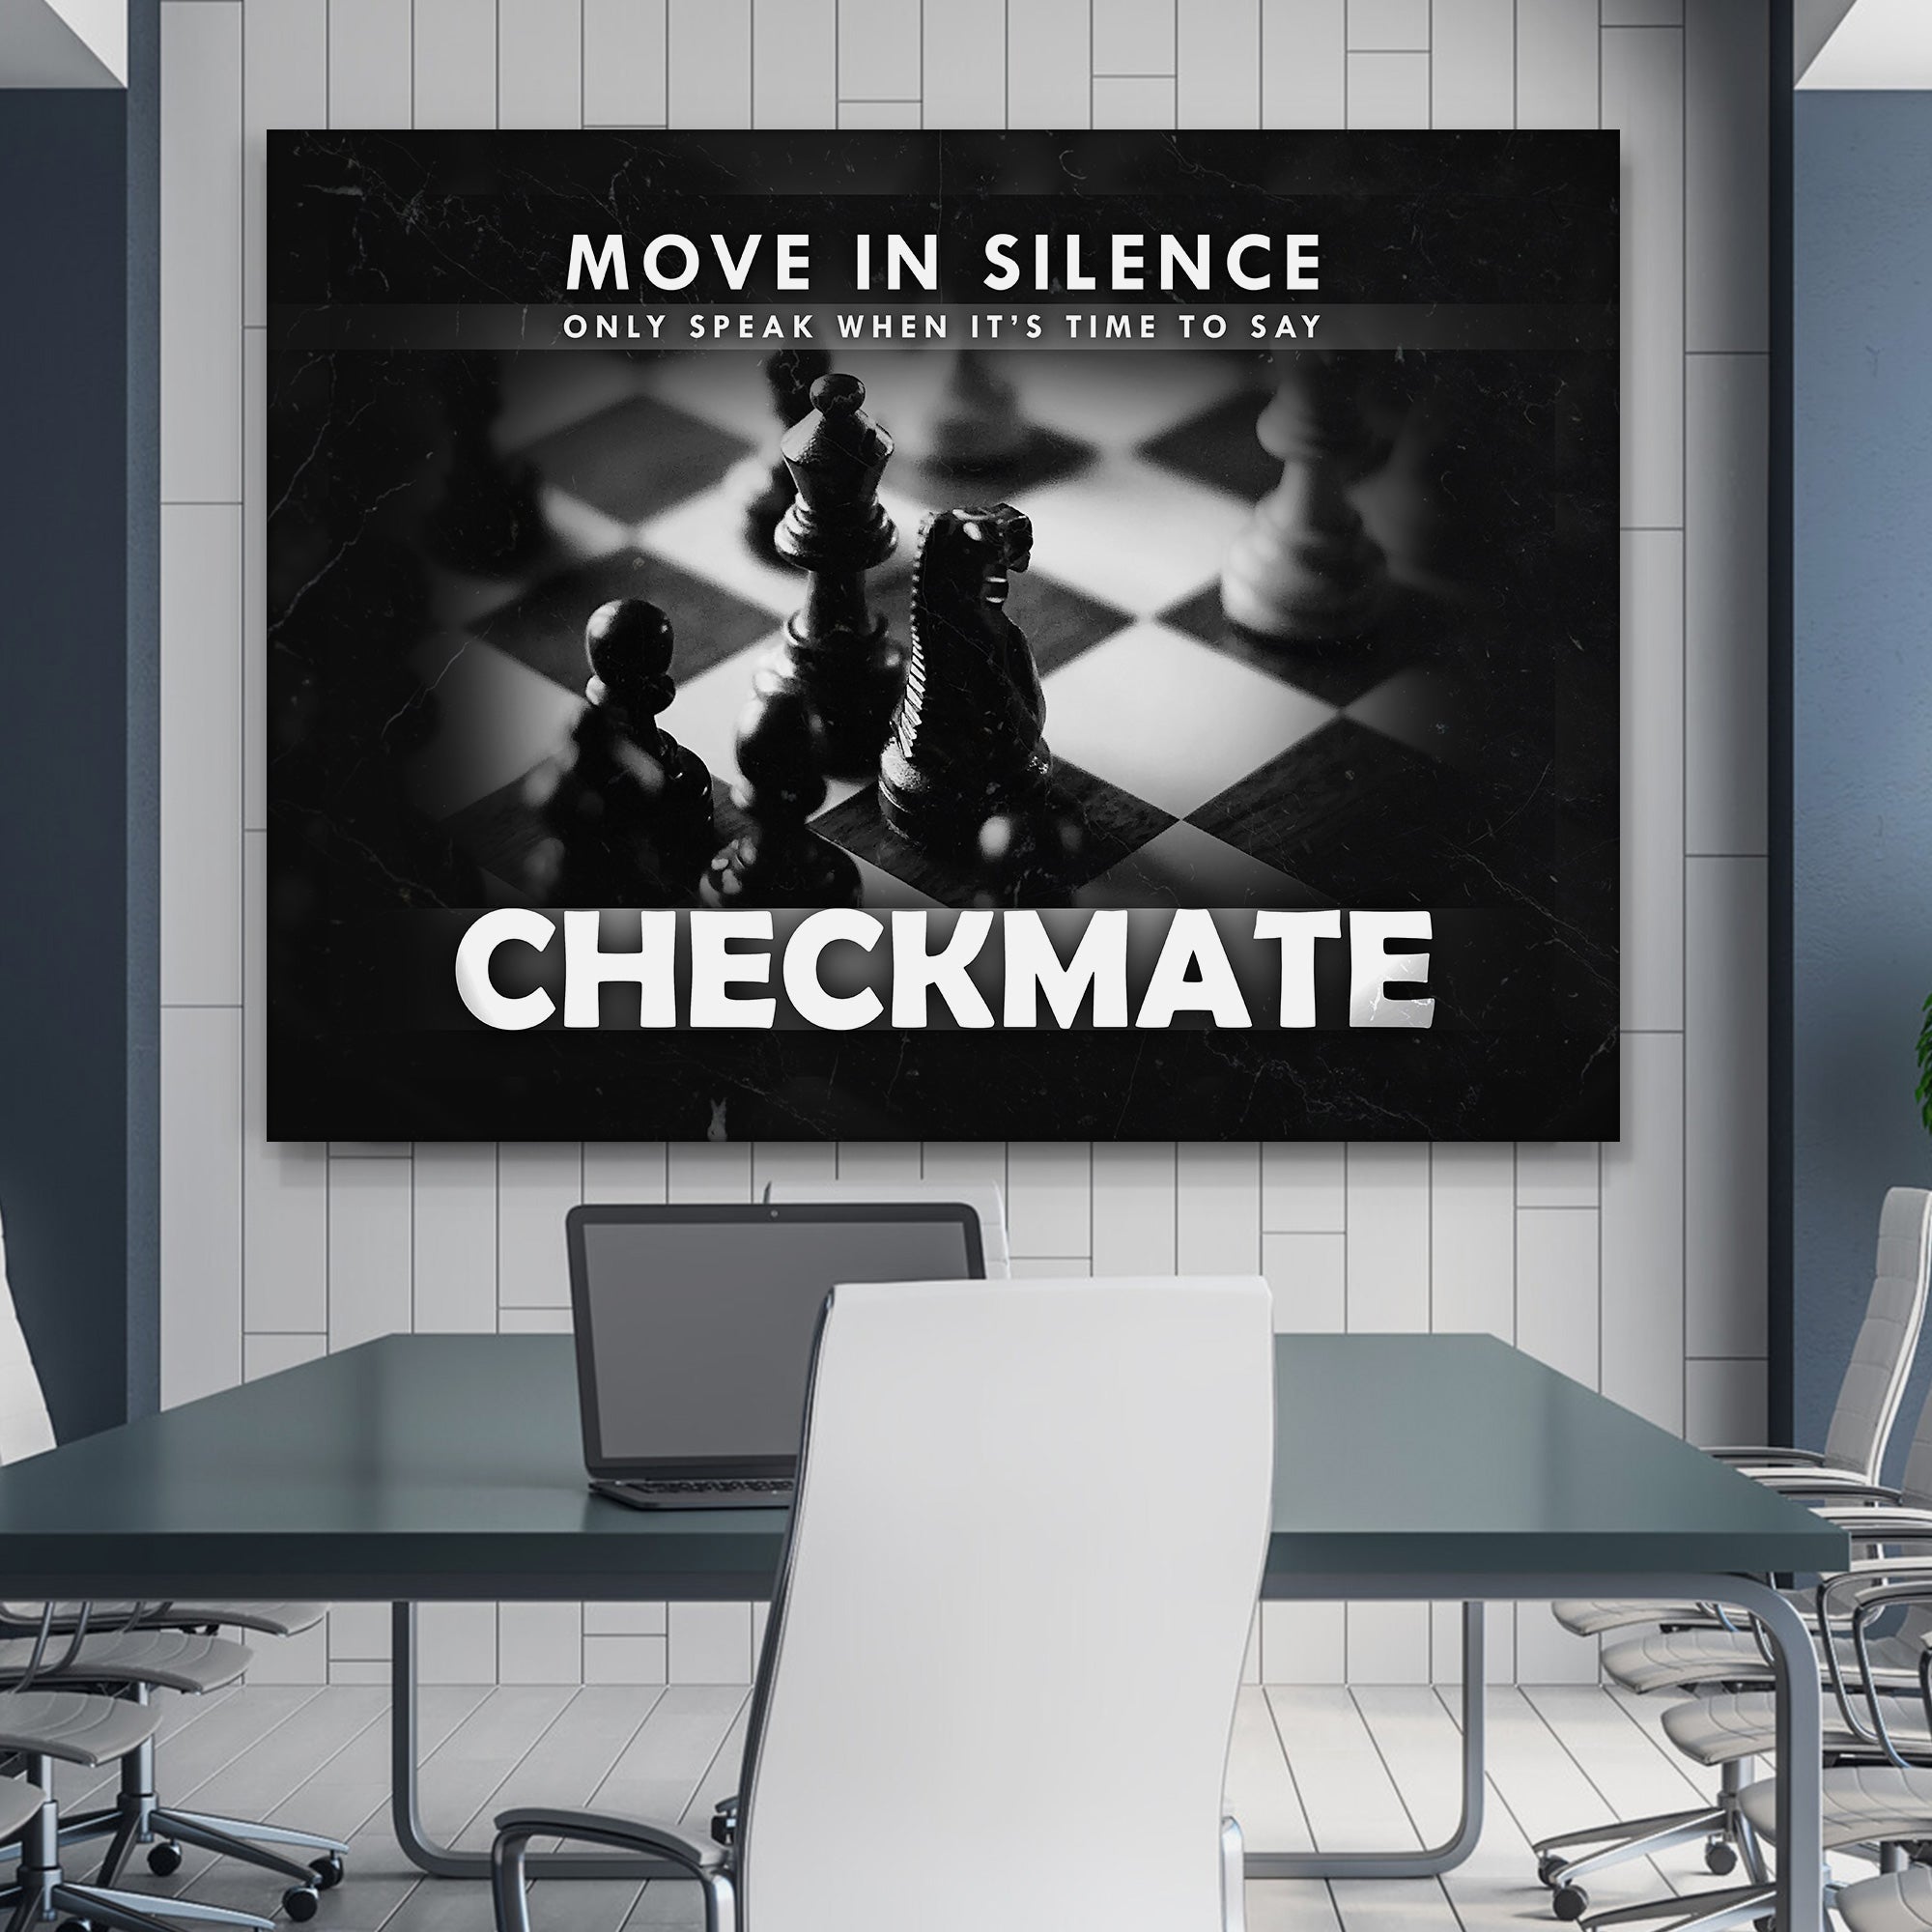 Move in silence, only speak when it's time to say checkmate. - The